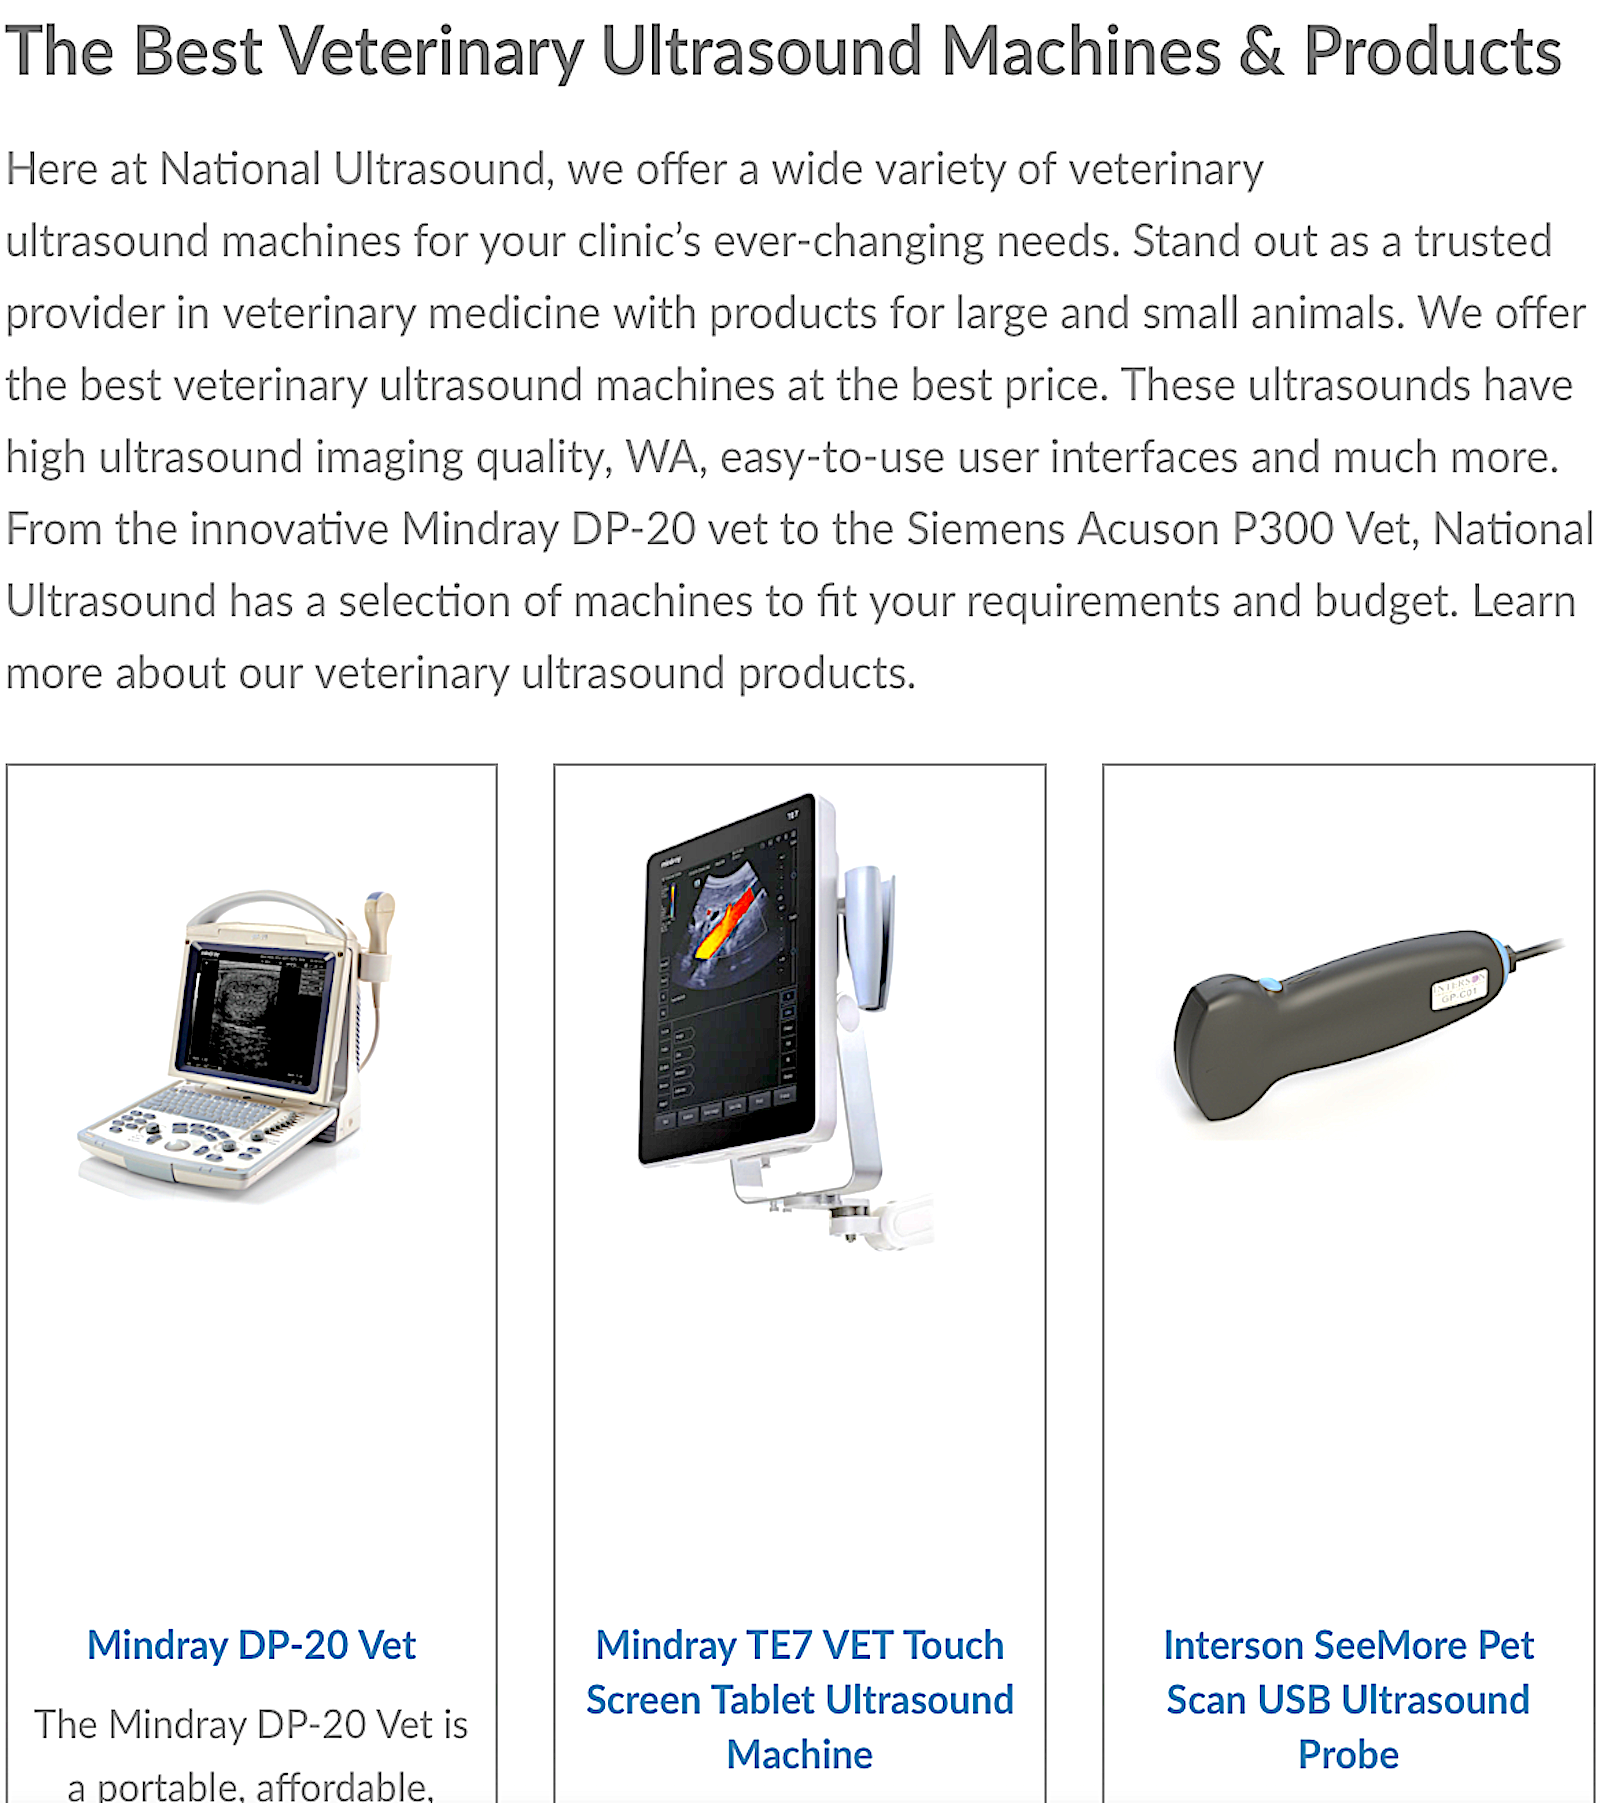 NATIONAL ULTRASOUND: the best veterinary ultrasound machines and products - Vital Vet